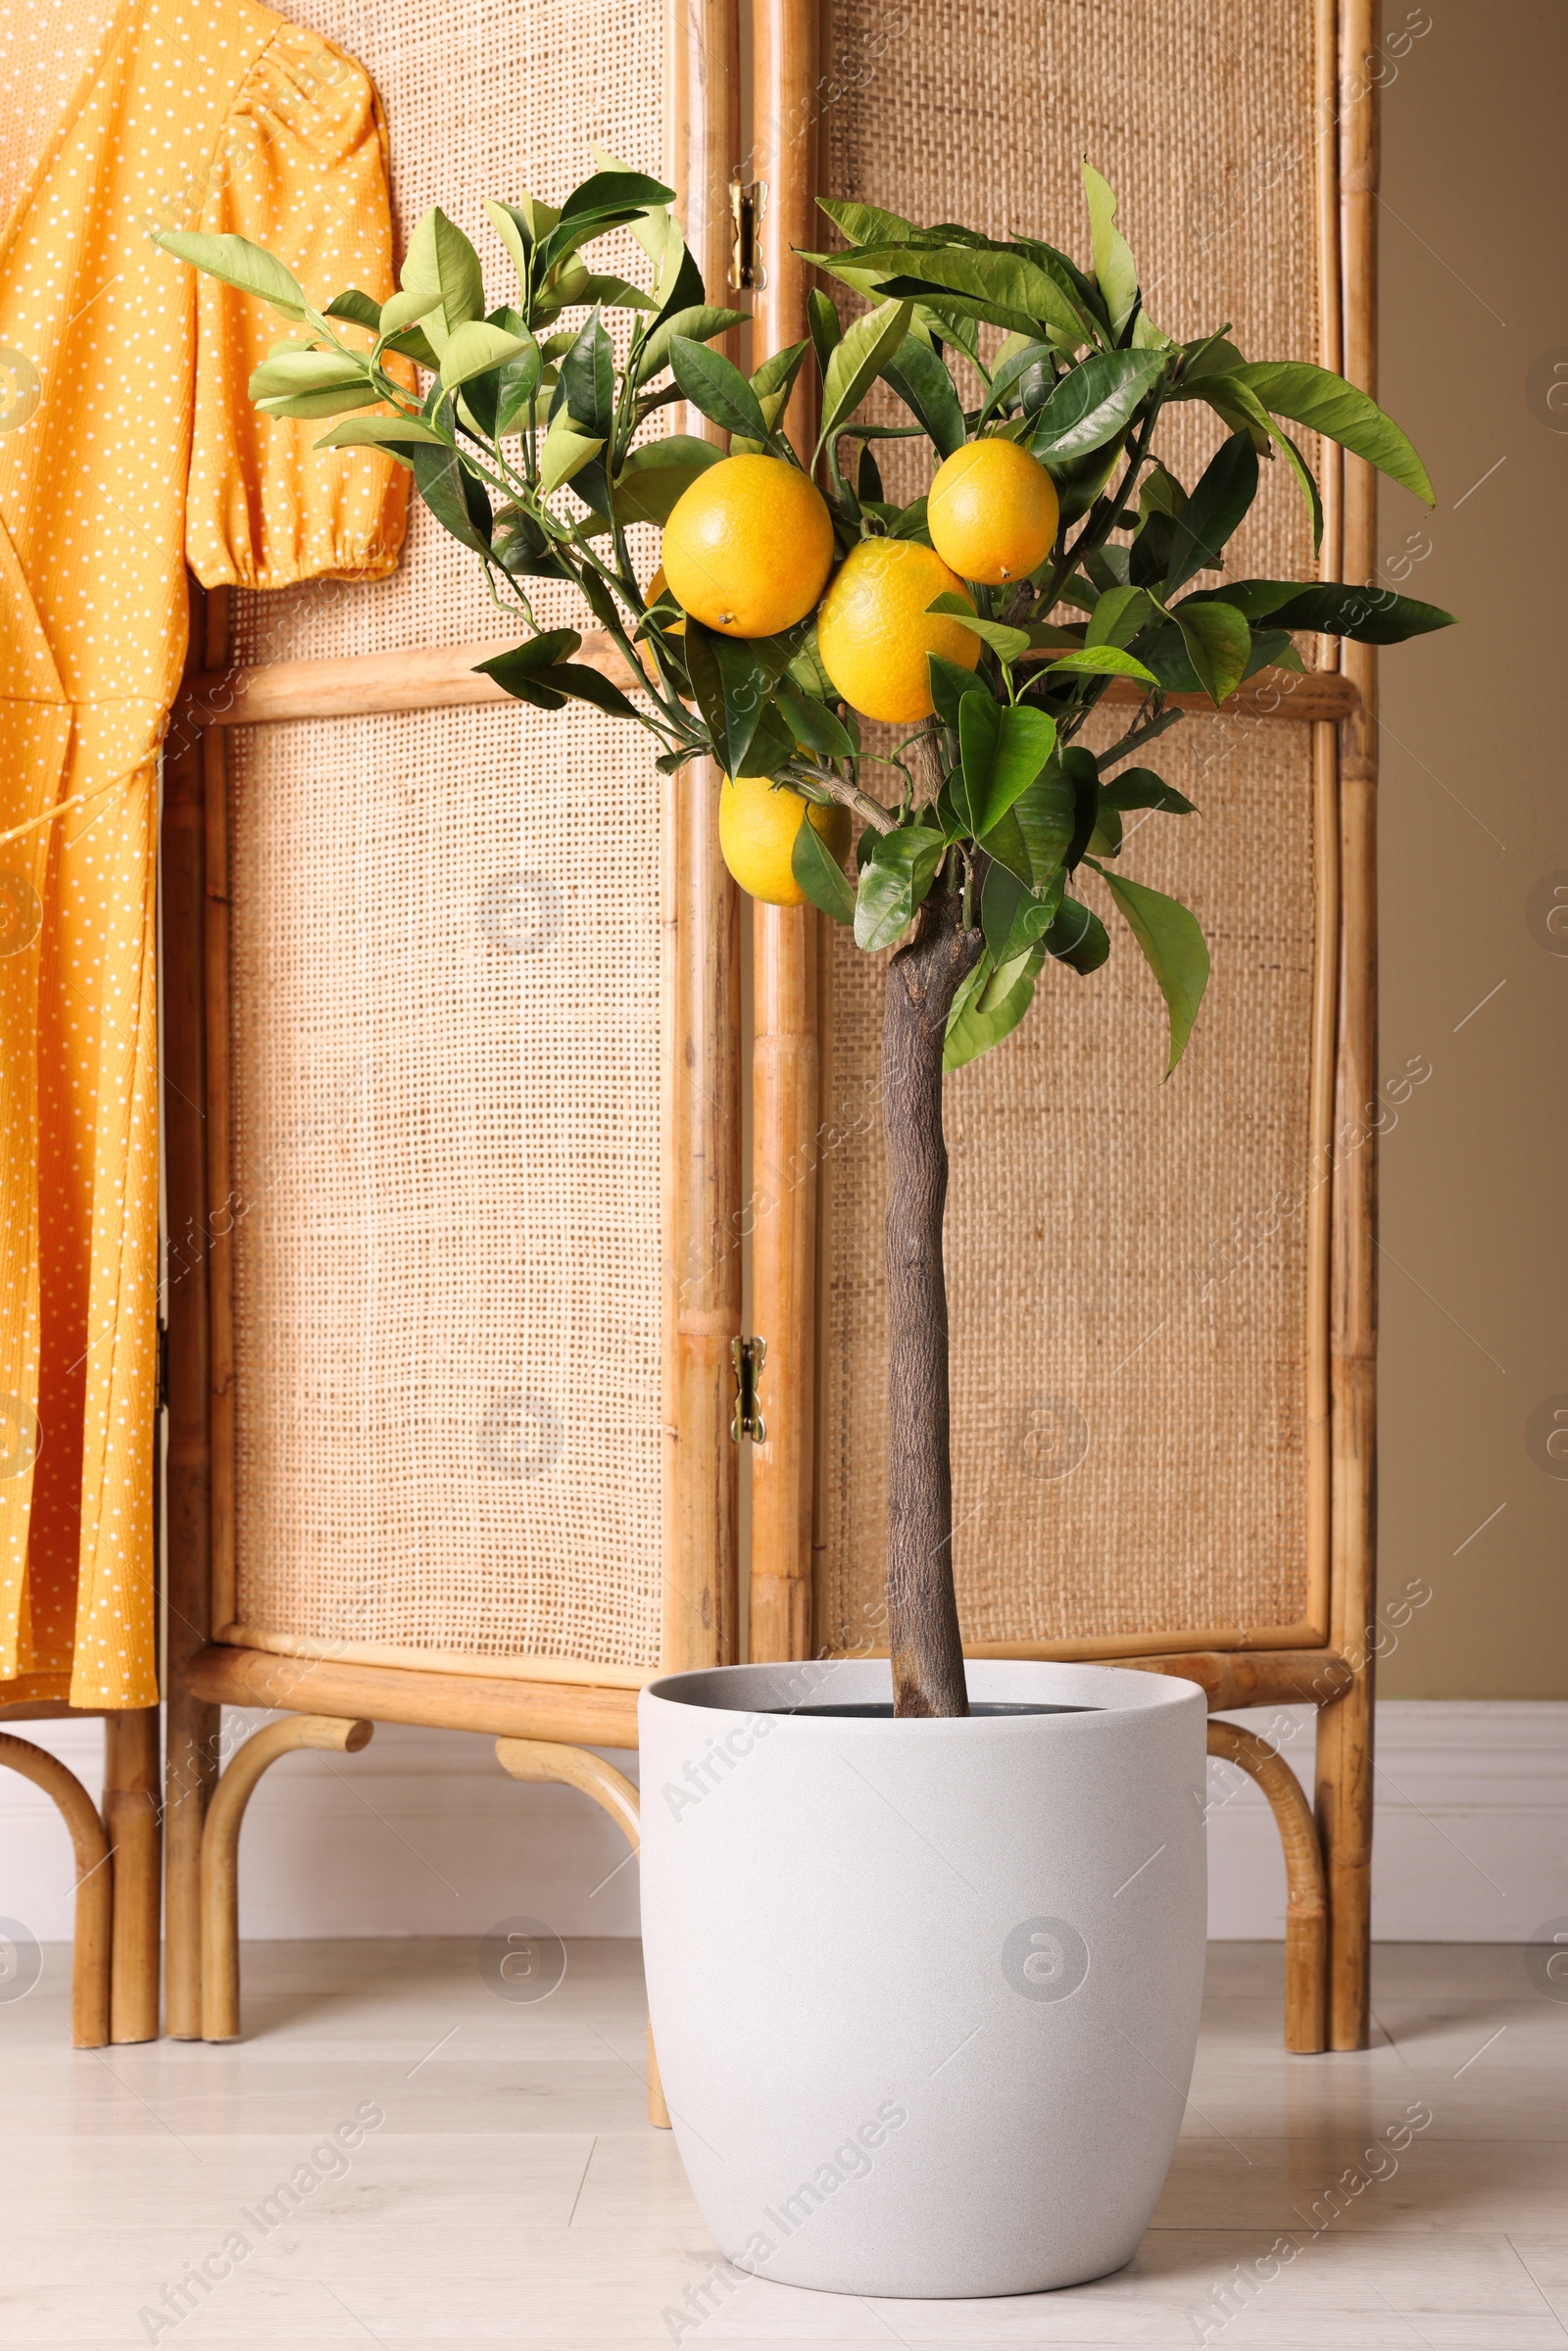 Photo of Idea for minimalist interior design. Small potted lemon tree with fruits near folding screen indoors